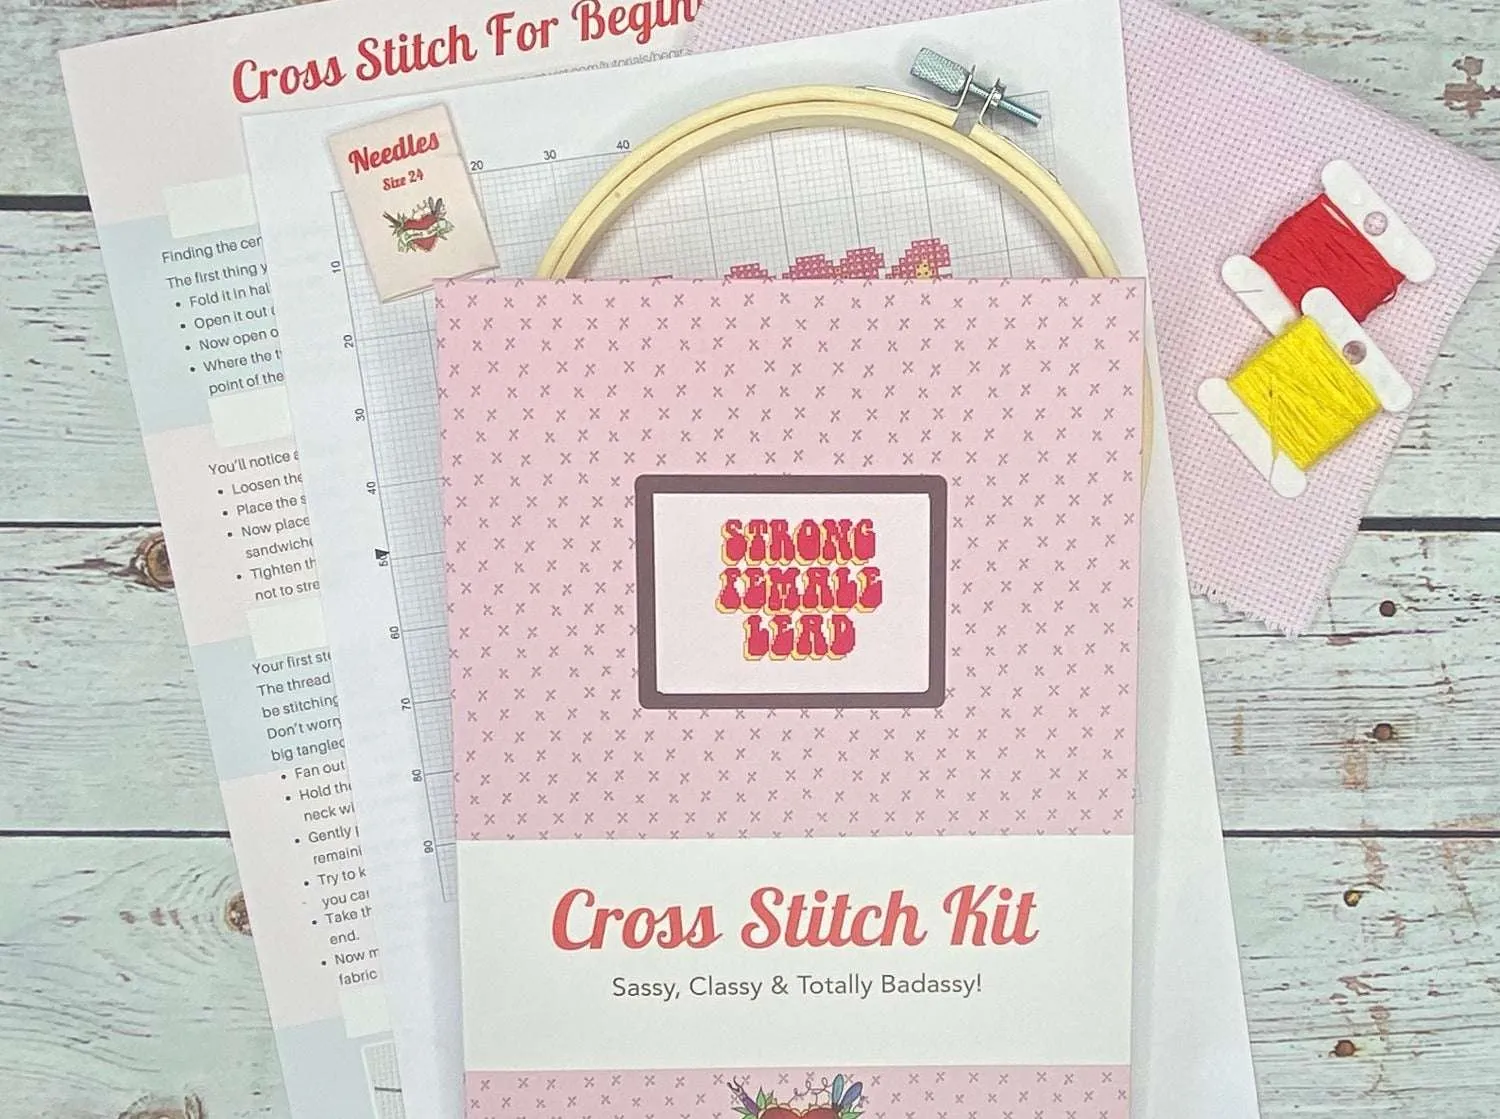 Strong Female Lead- Cross Stitch Kit And Pattern